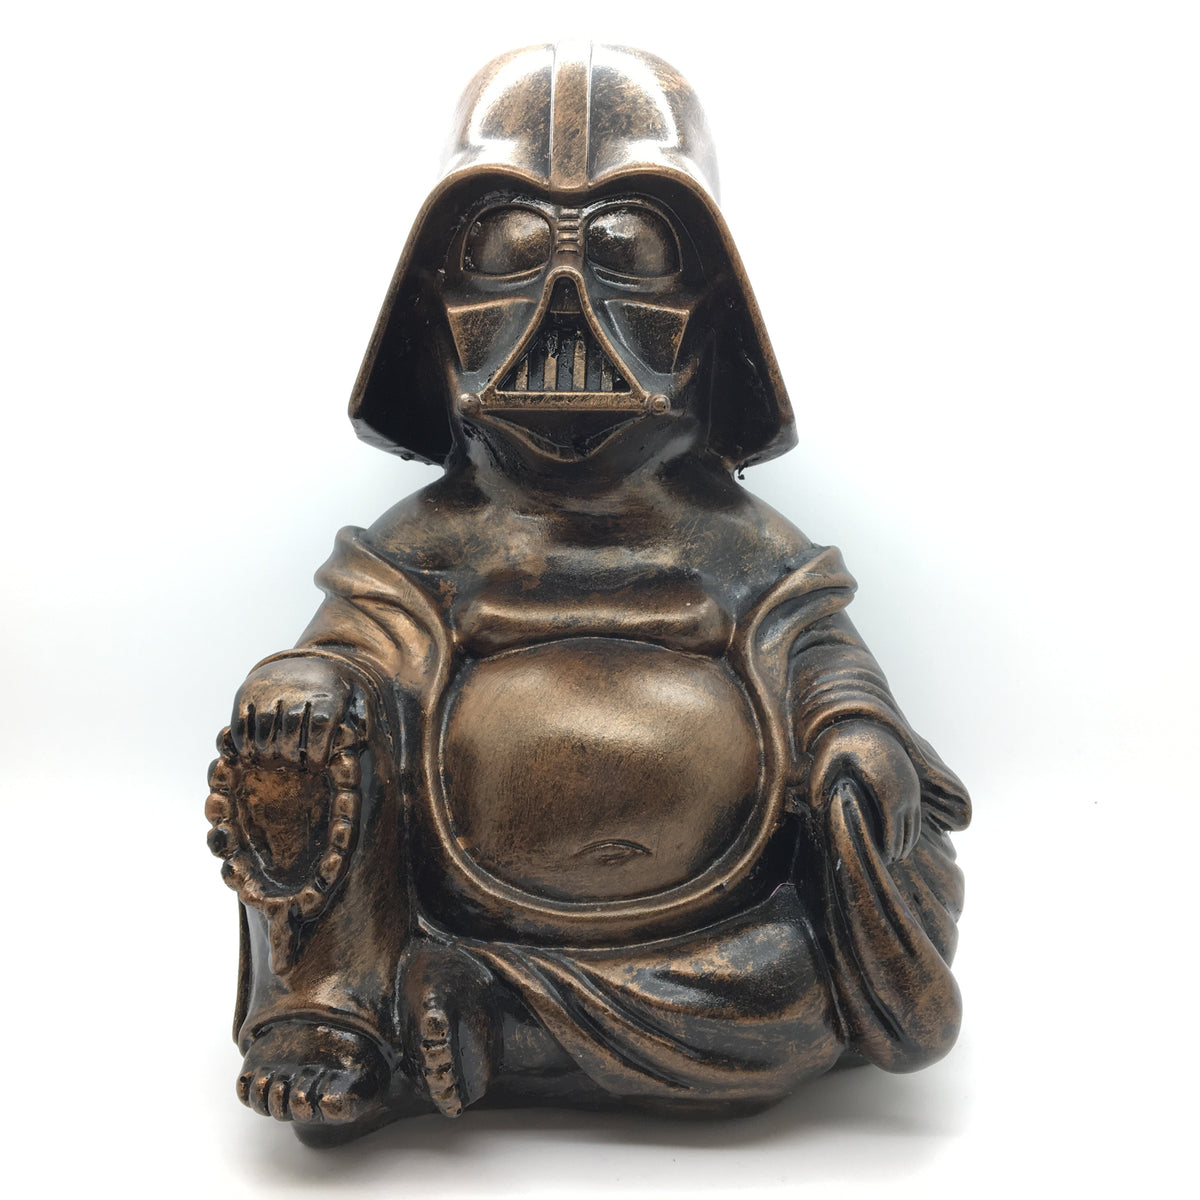 Darth Vader Buddha Large 9 inch Art Toy Figure by Modulicious